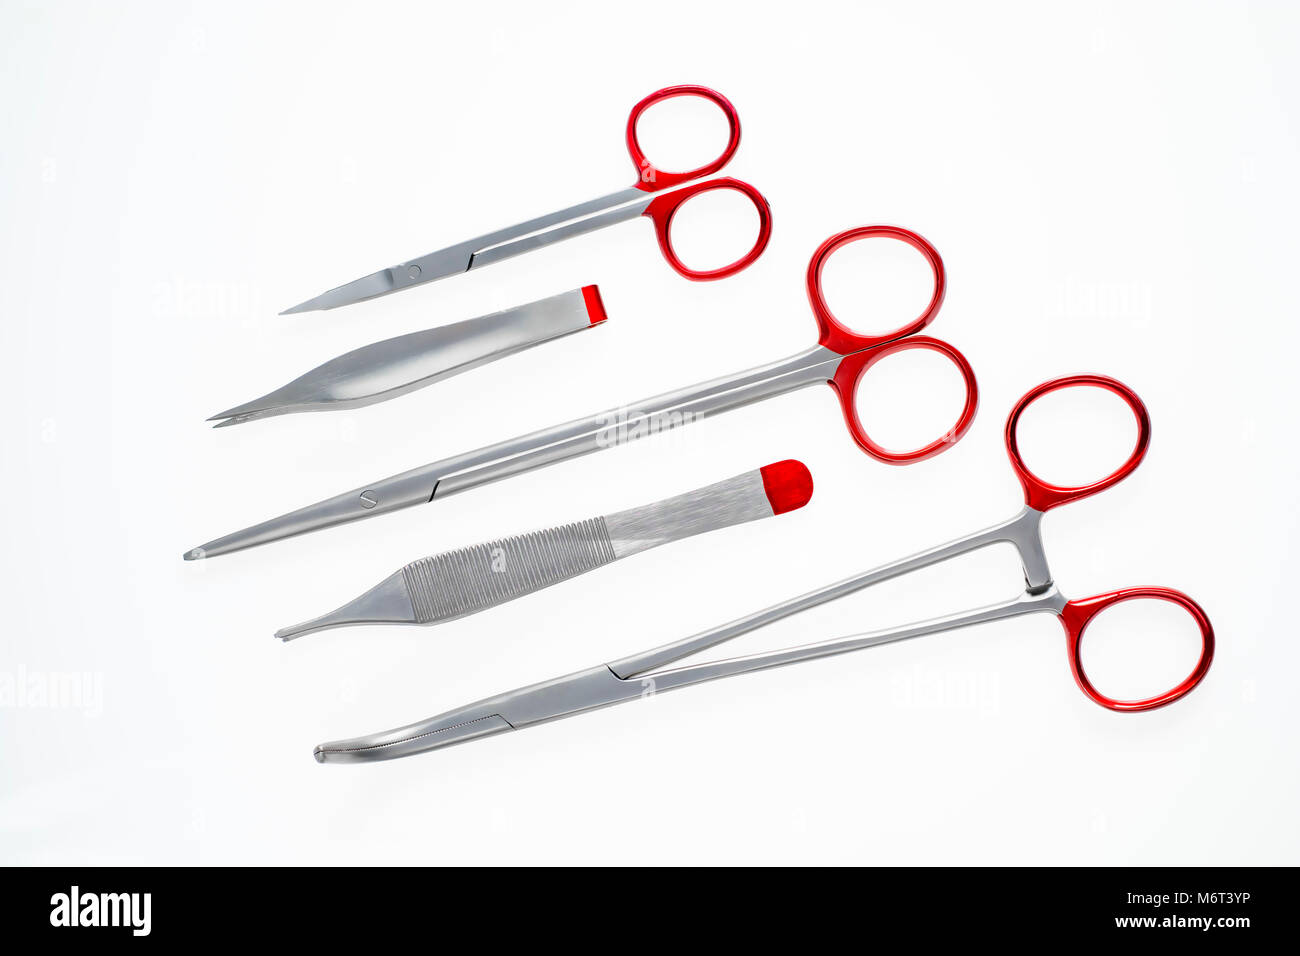 Diverse medical and surgery instruments isolated in white Stock Photo